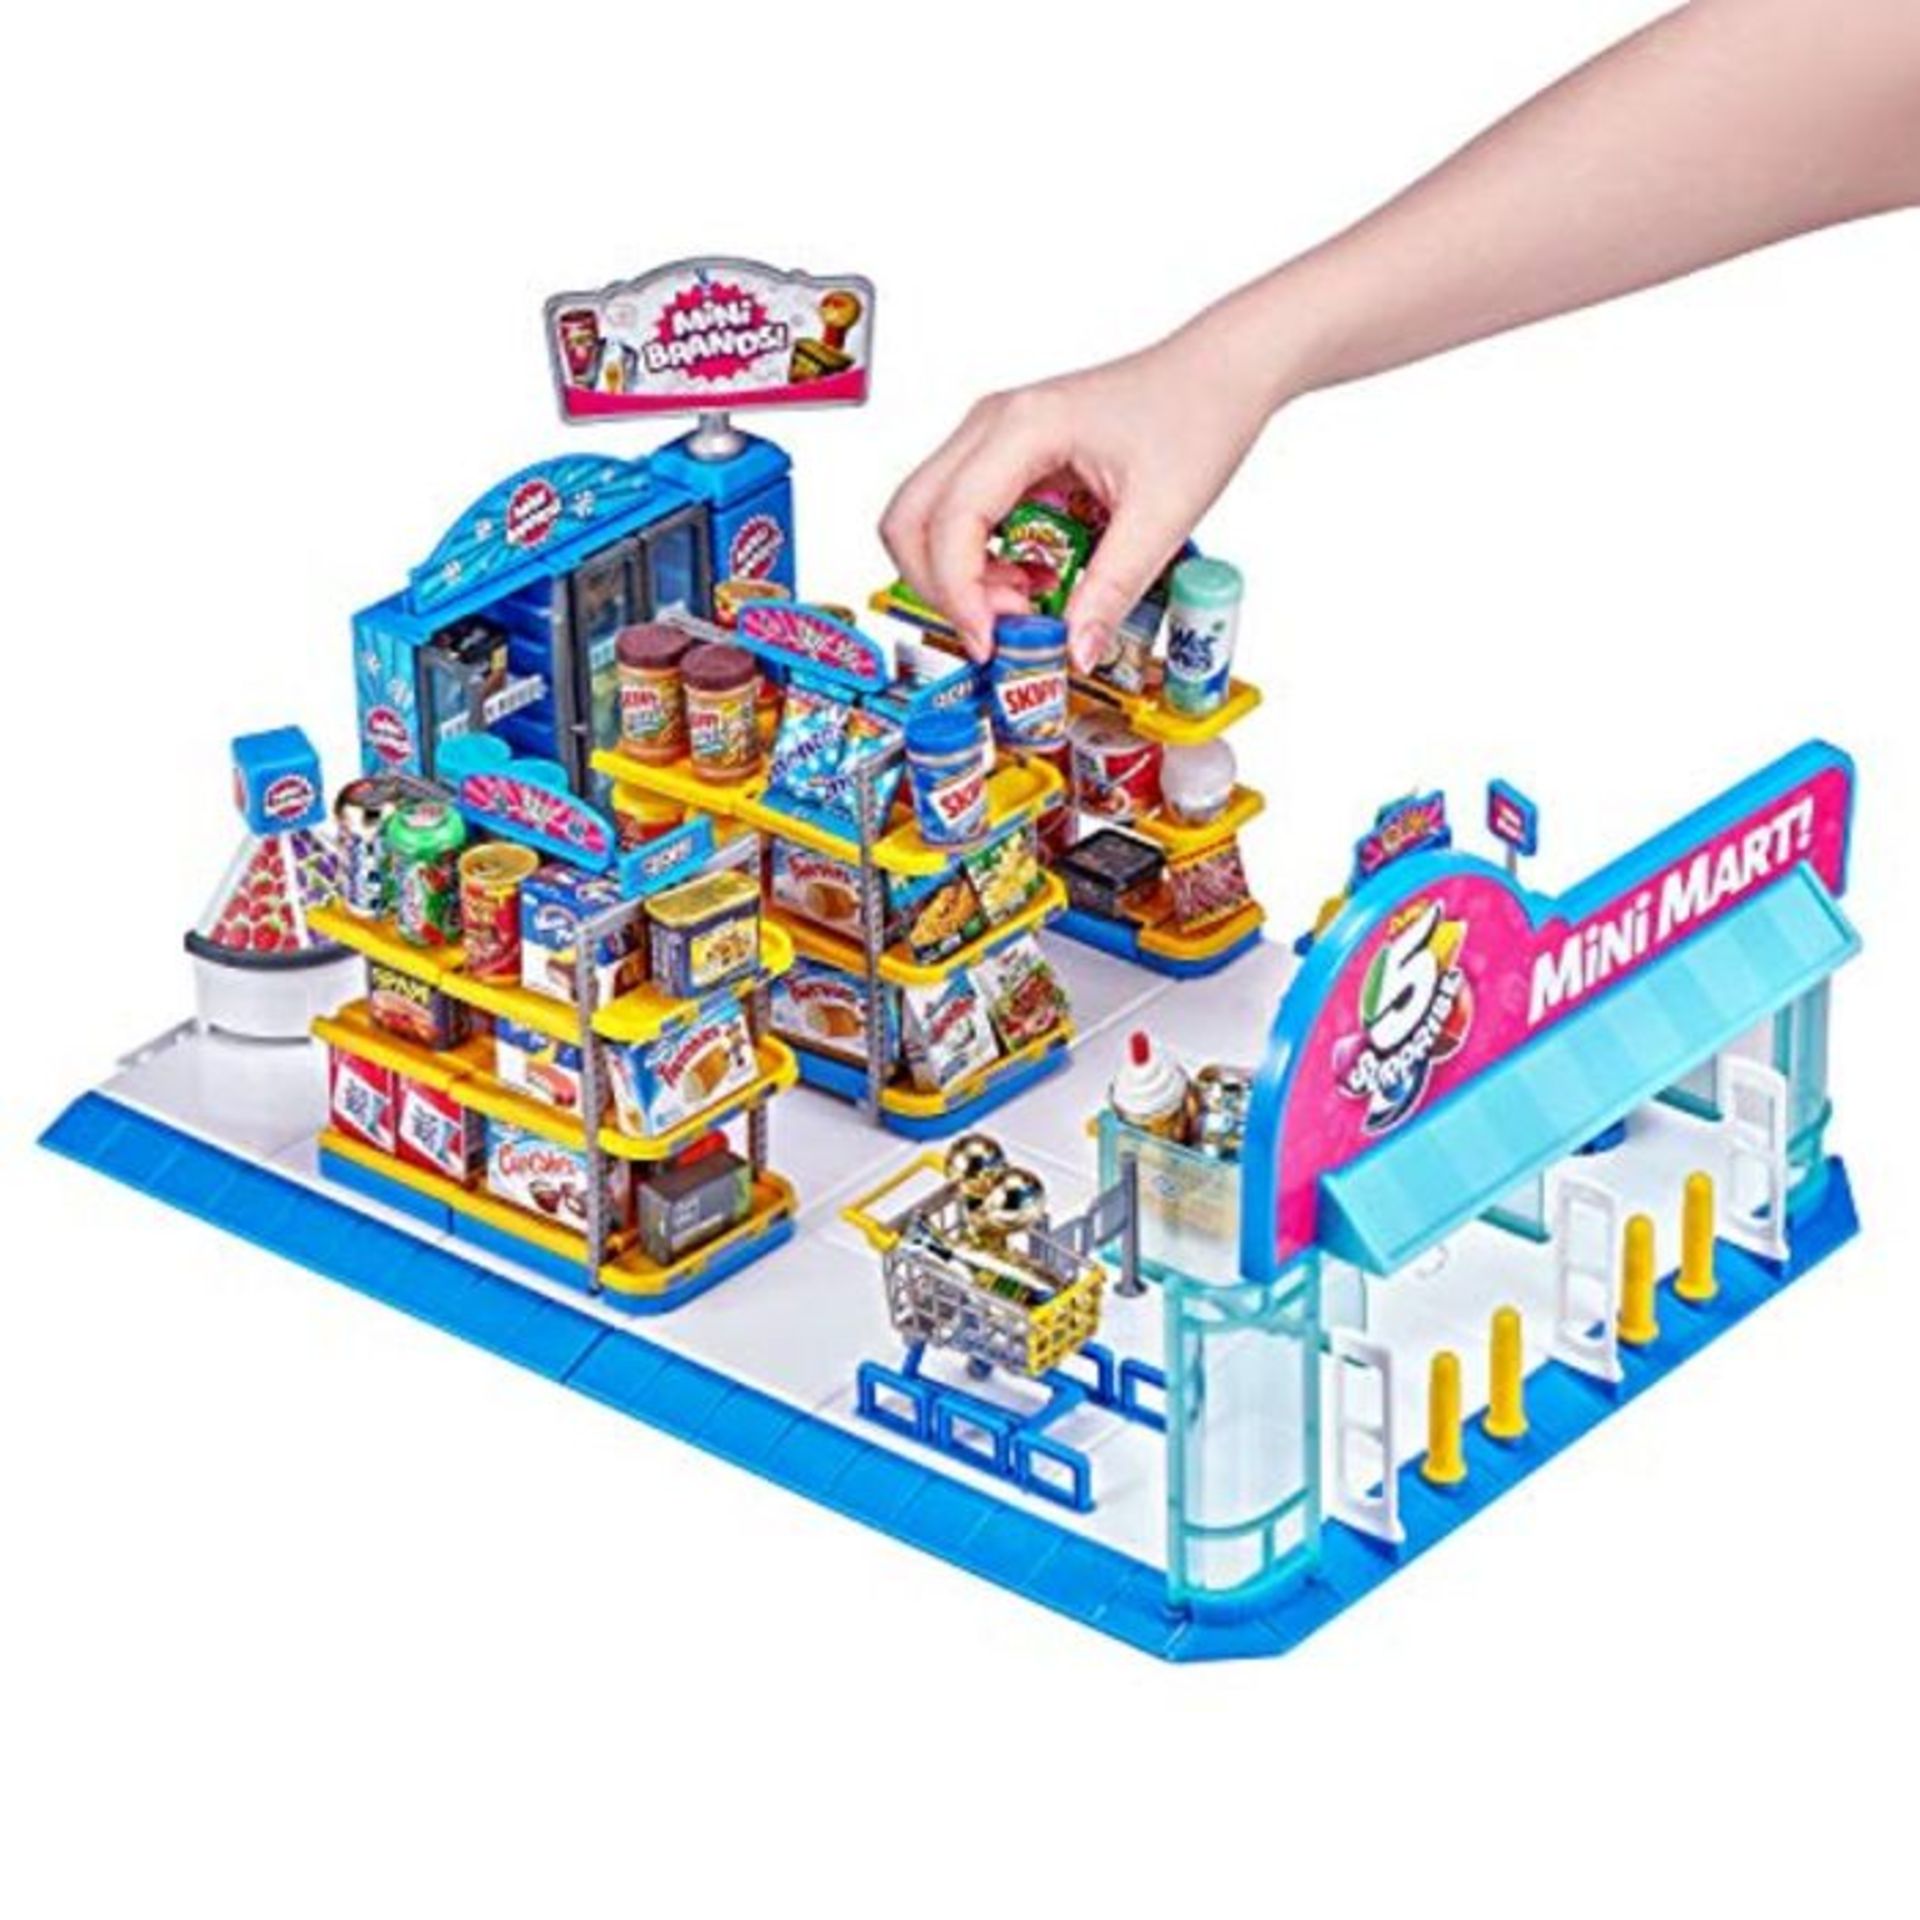 ZURU 5 SURPRISE 7798 Electronic Mart with 4 Mystery Playset-Brown Box Packaging-Mini B